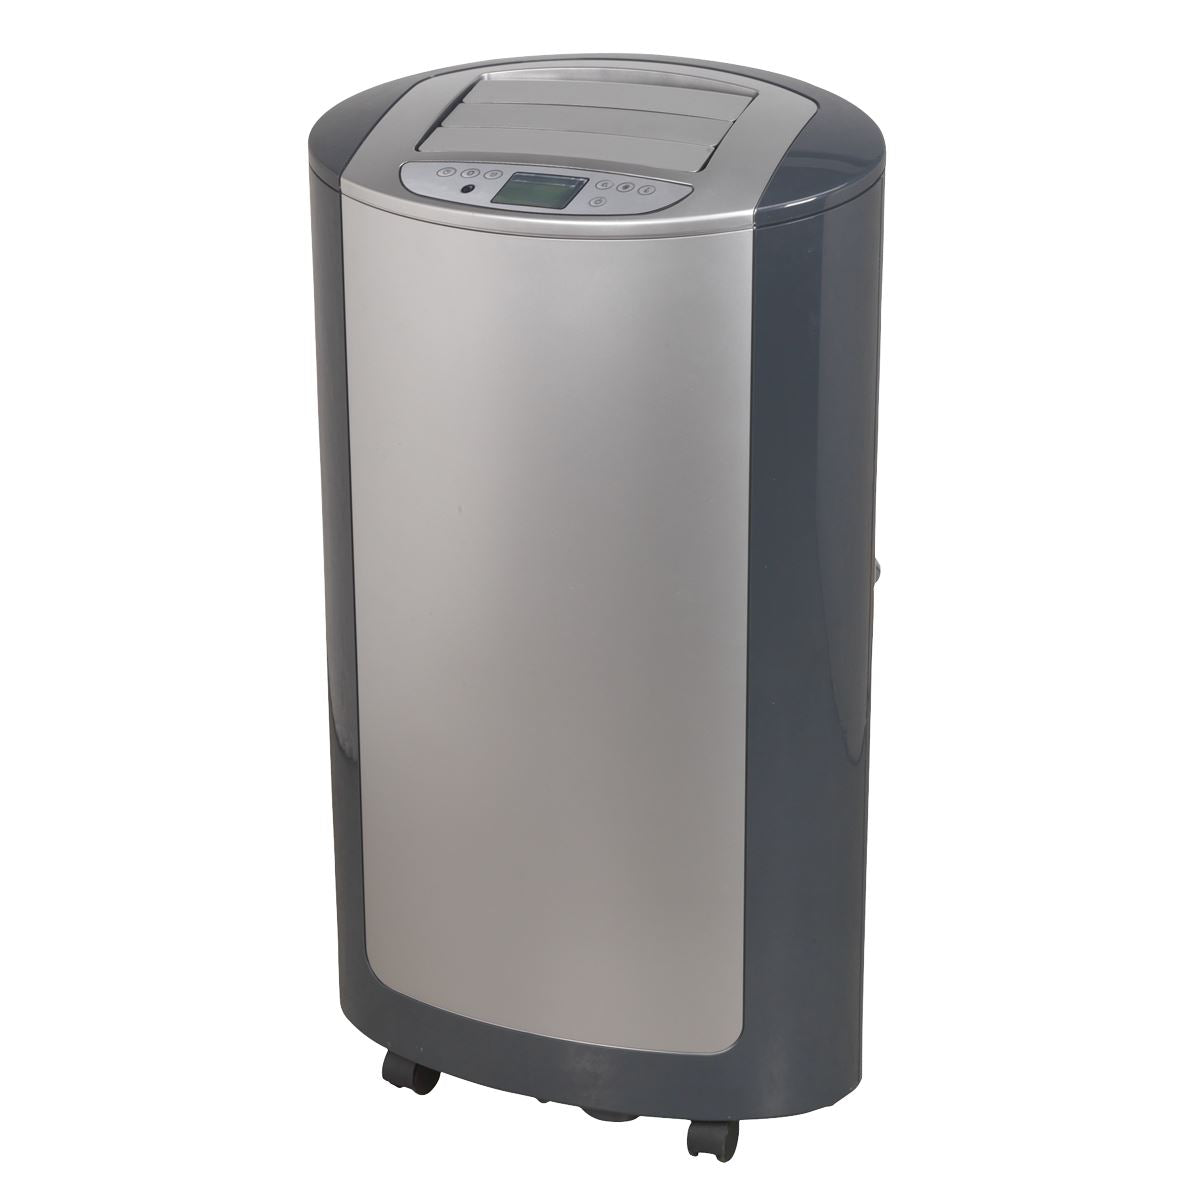 Sealey Portable Air Conditioner/Dehumidifier/Air Cooler/Heater with Window Sealing Kit 12,000Btu/hr